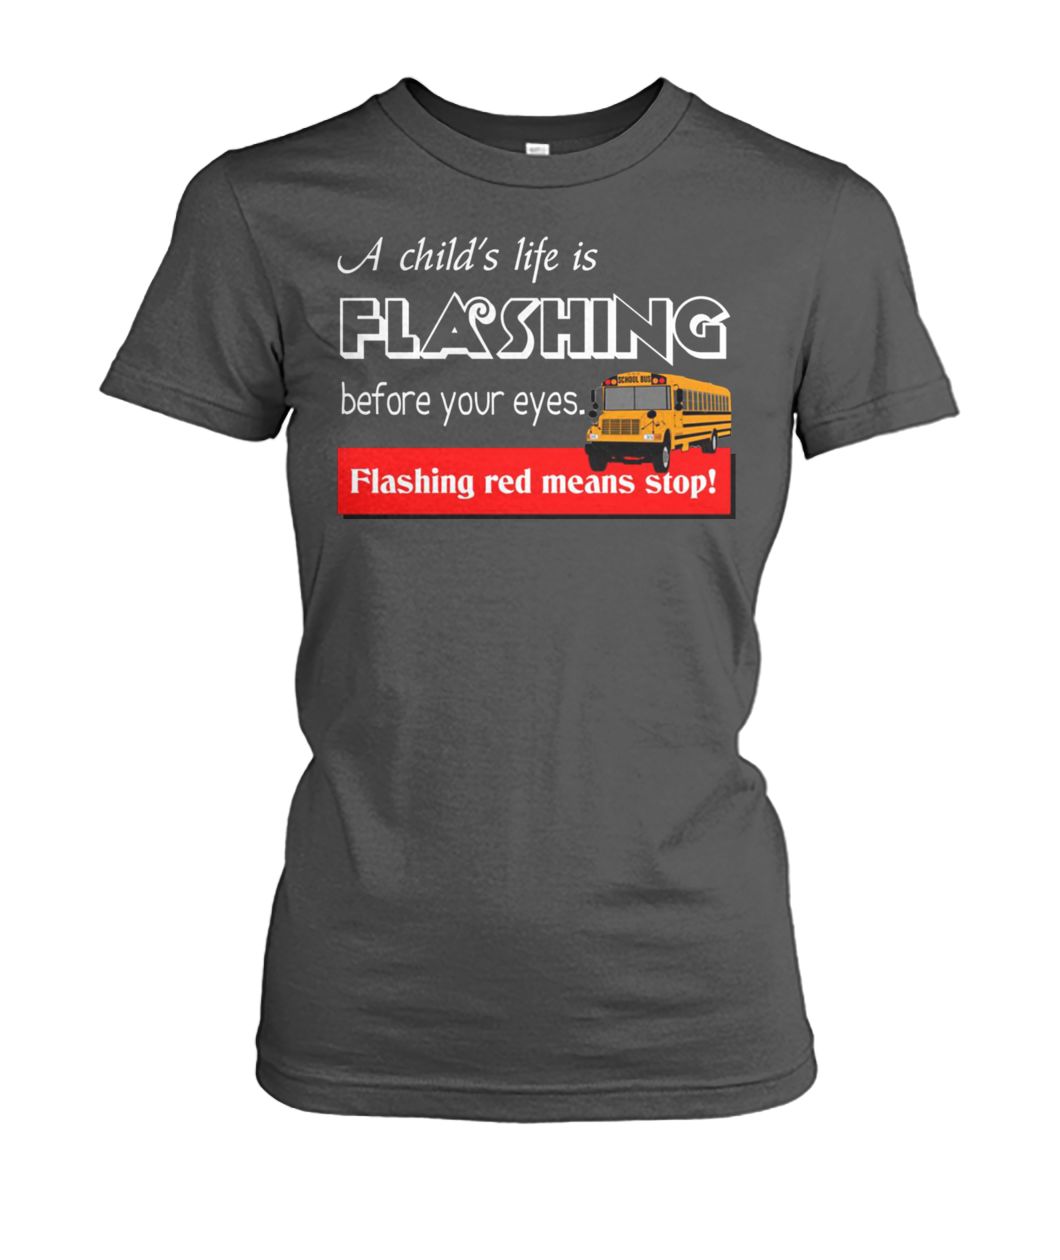 A child's life is flashing before your eyes flashing red means stop school bus driver women's crew tee